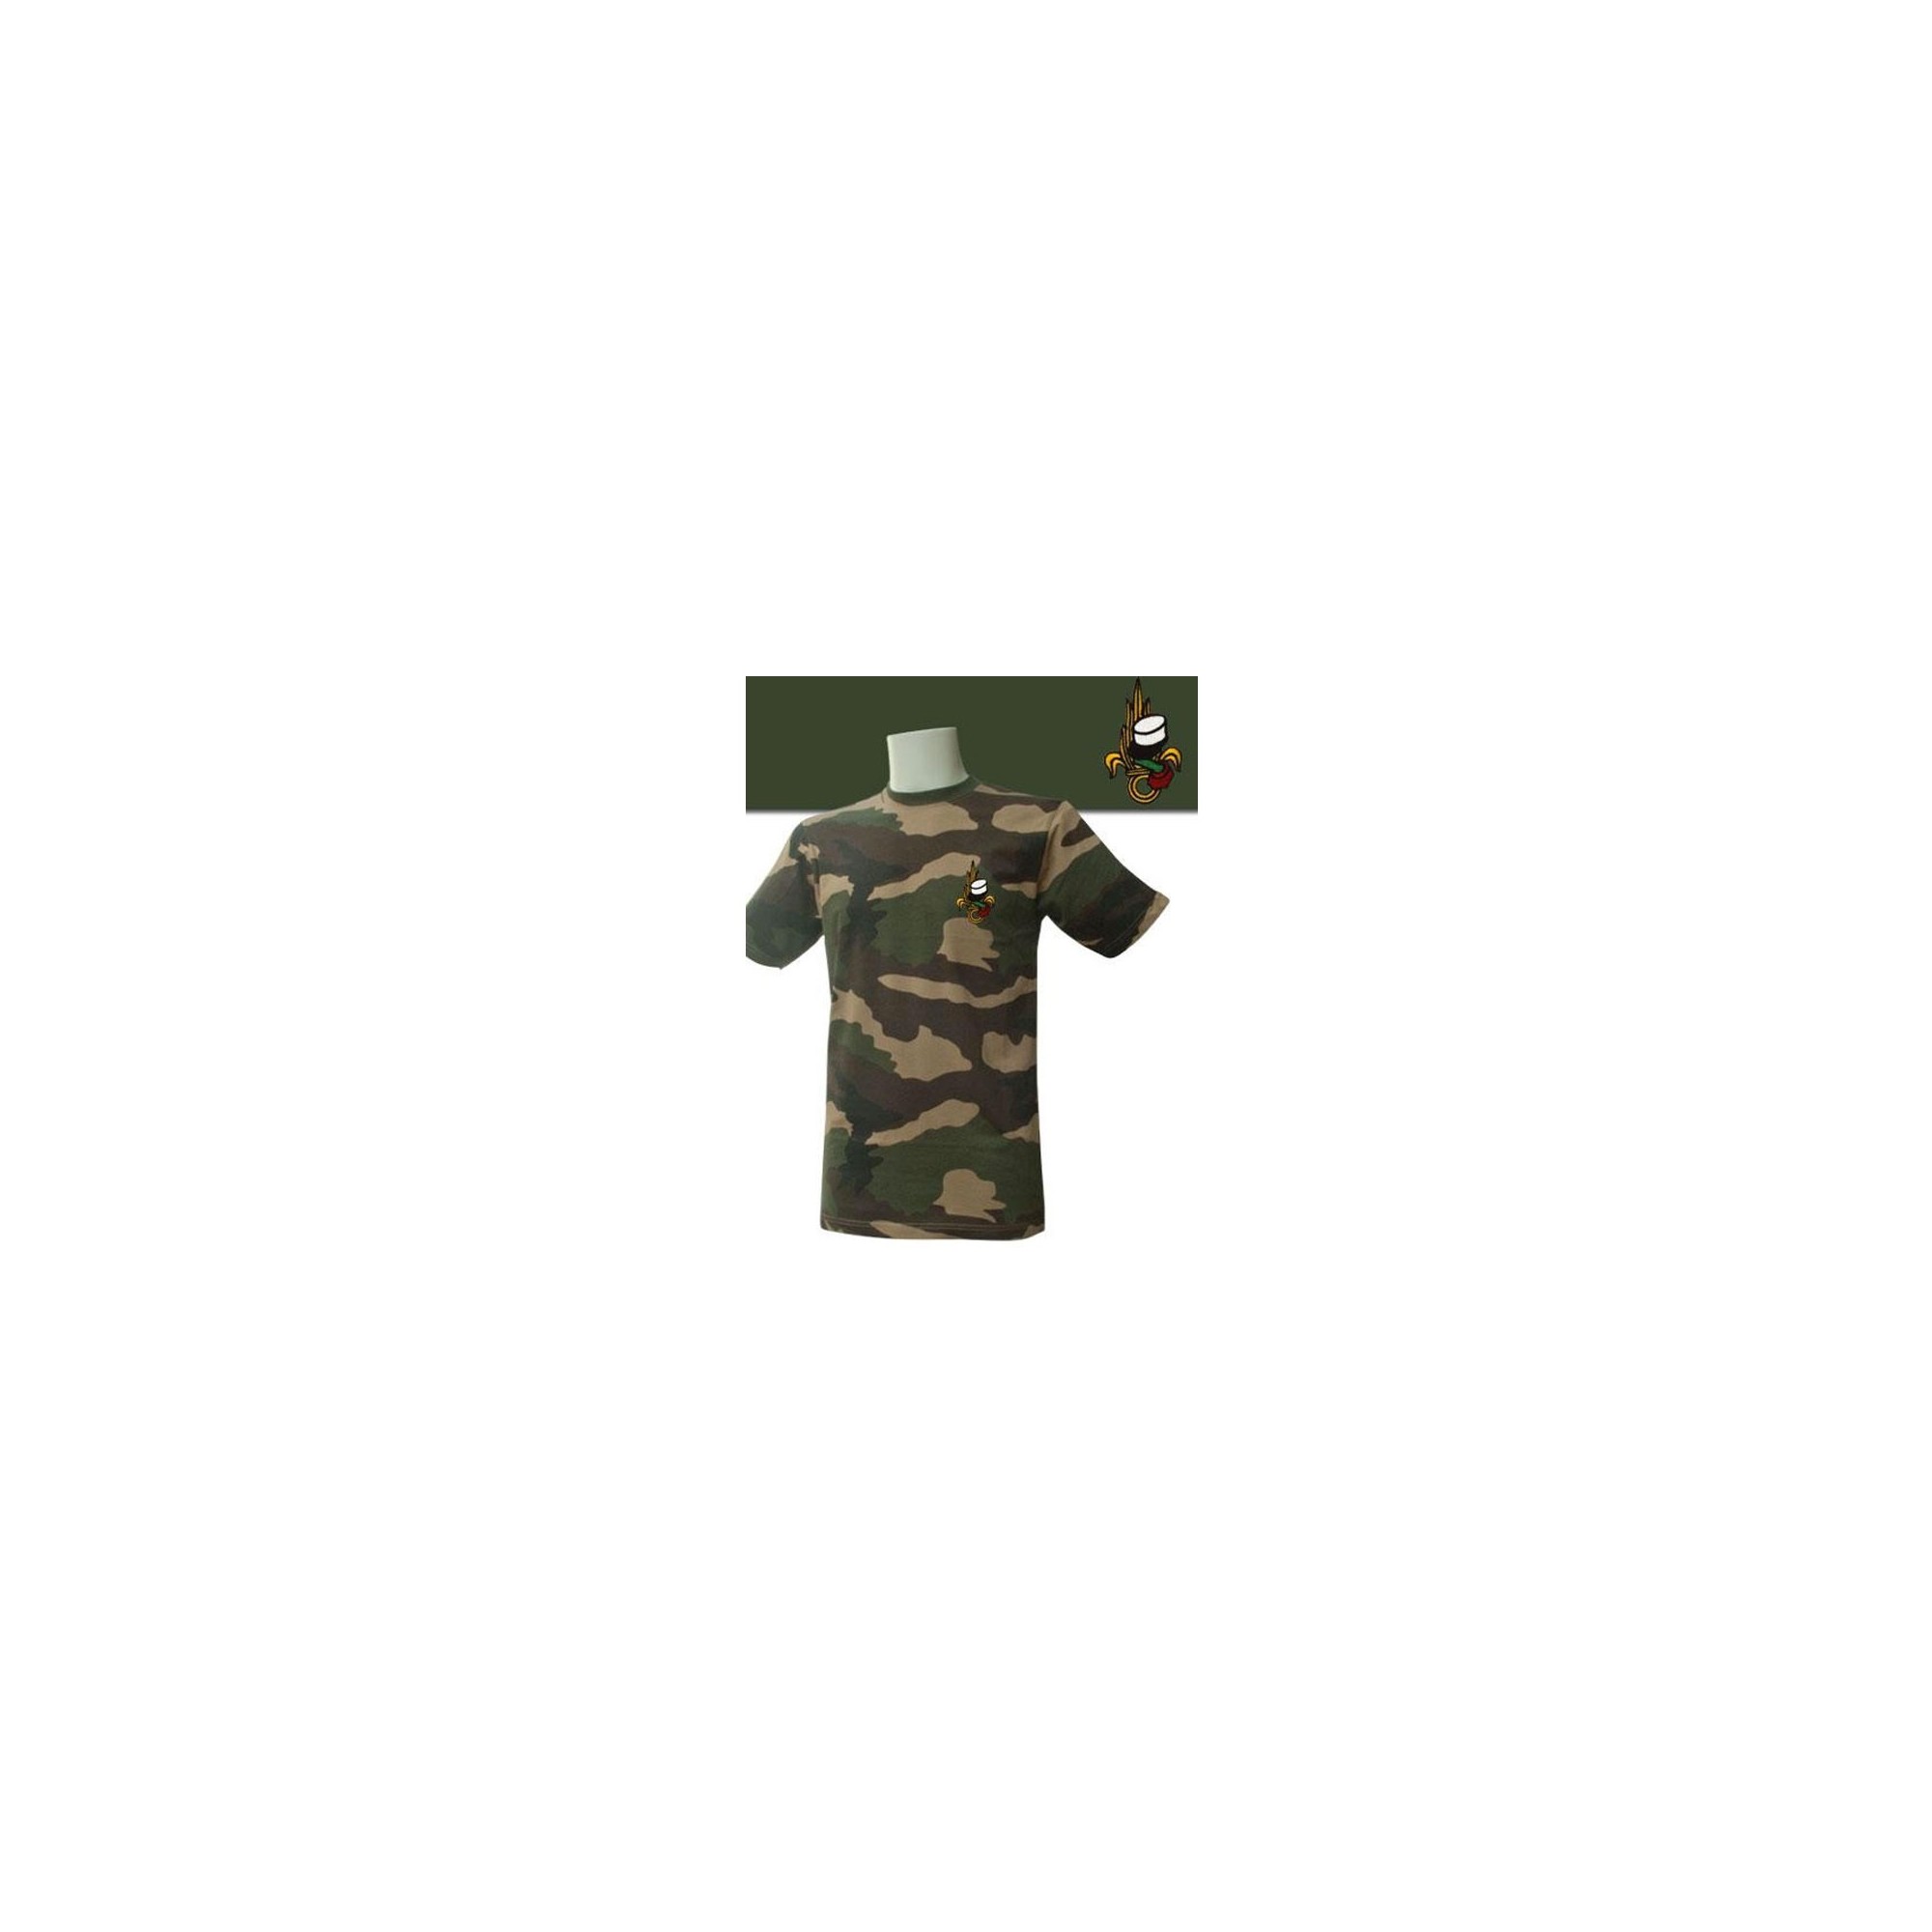 TEE SHIRT MANCHES COURTES CAMOUFLAGE BRODE LEGION